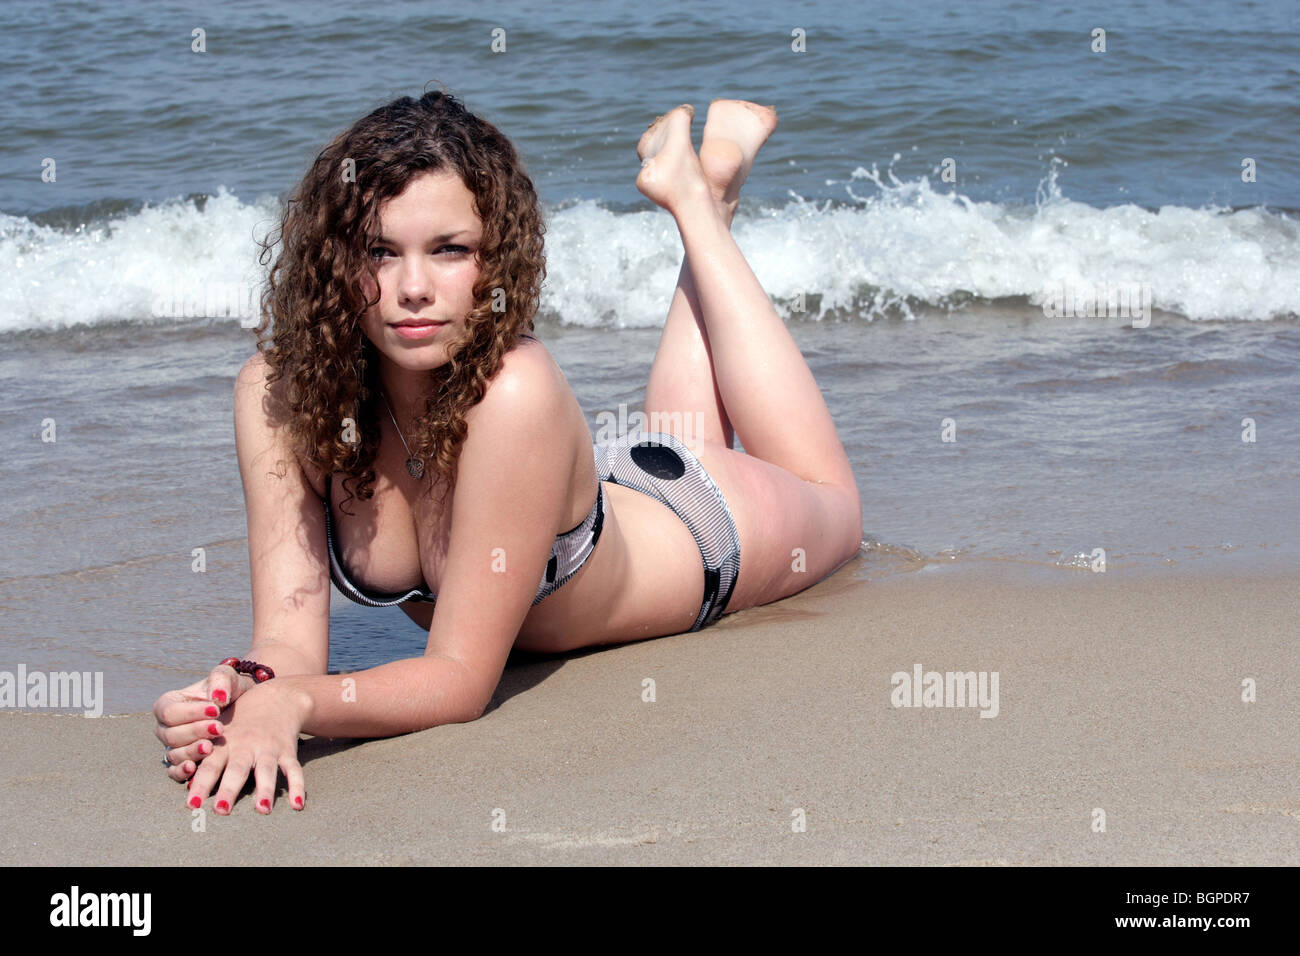 Girl lying down on the beach nude Page 3 Sunbathing Teen Not Nudity High Resolution Stock Photography And Images Alamy